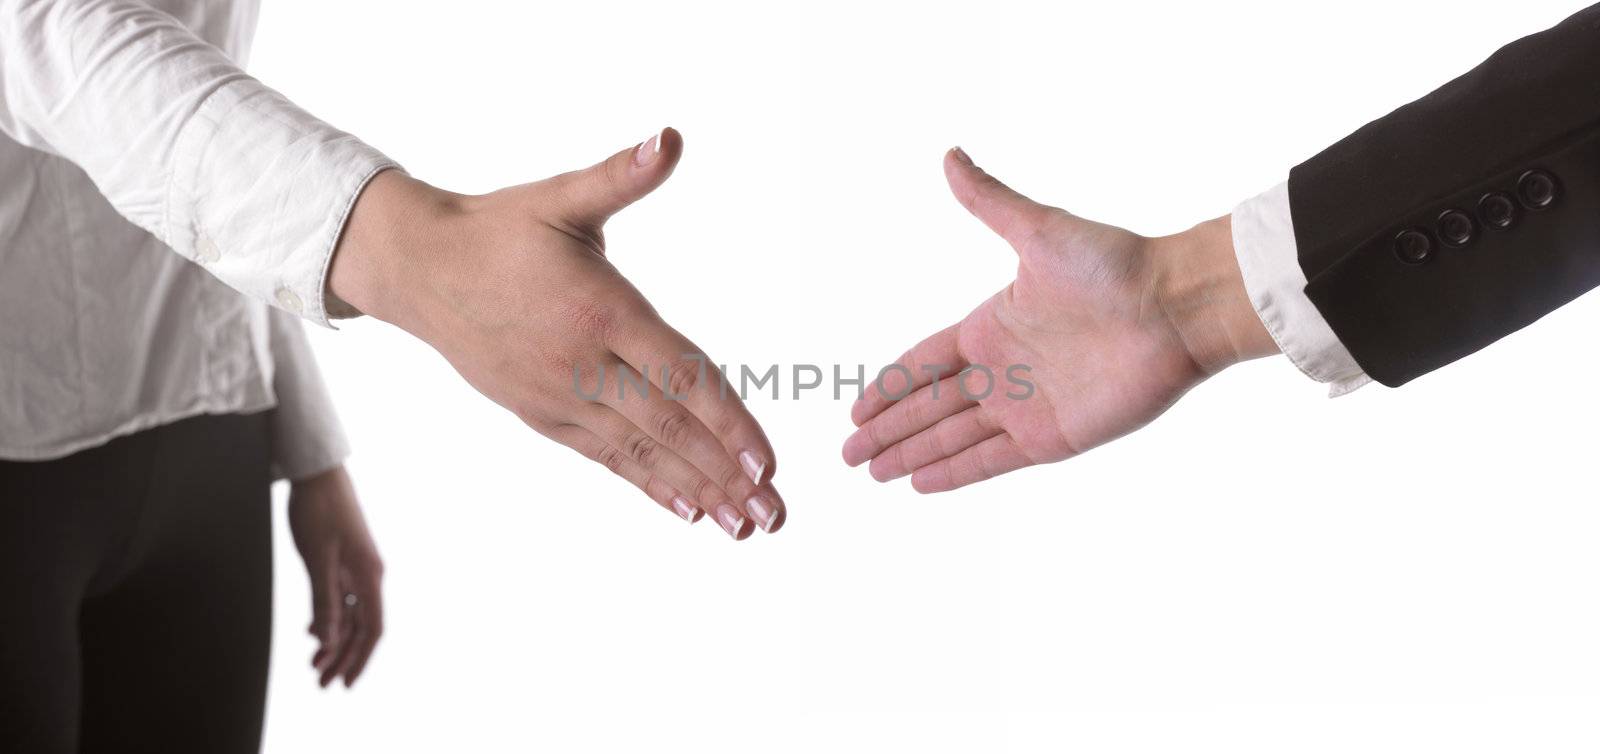 Hand Ready For Handshaking isolated on white background